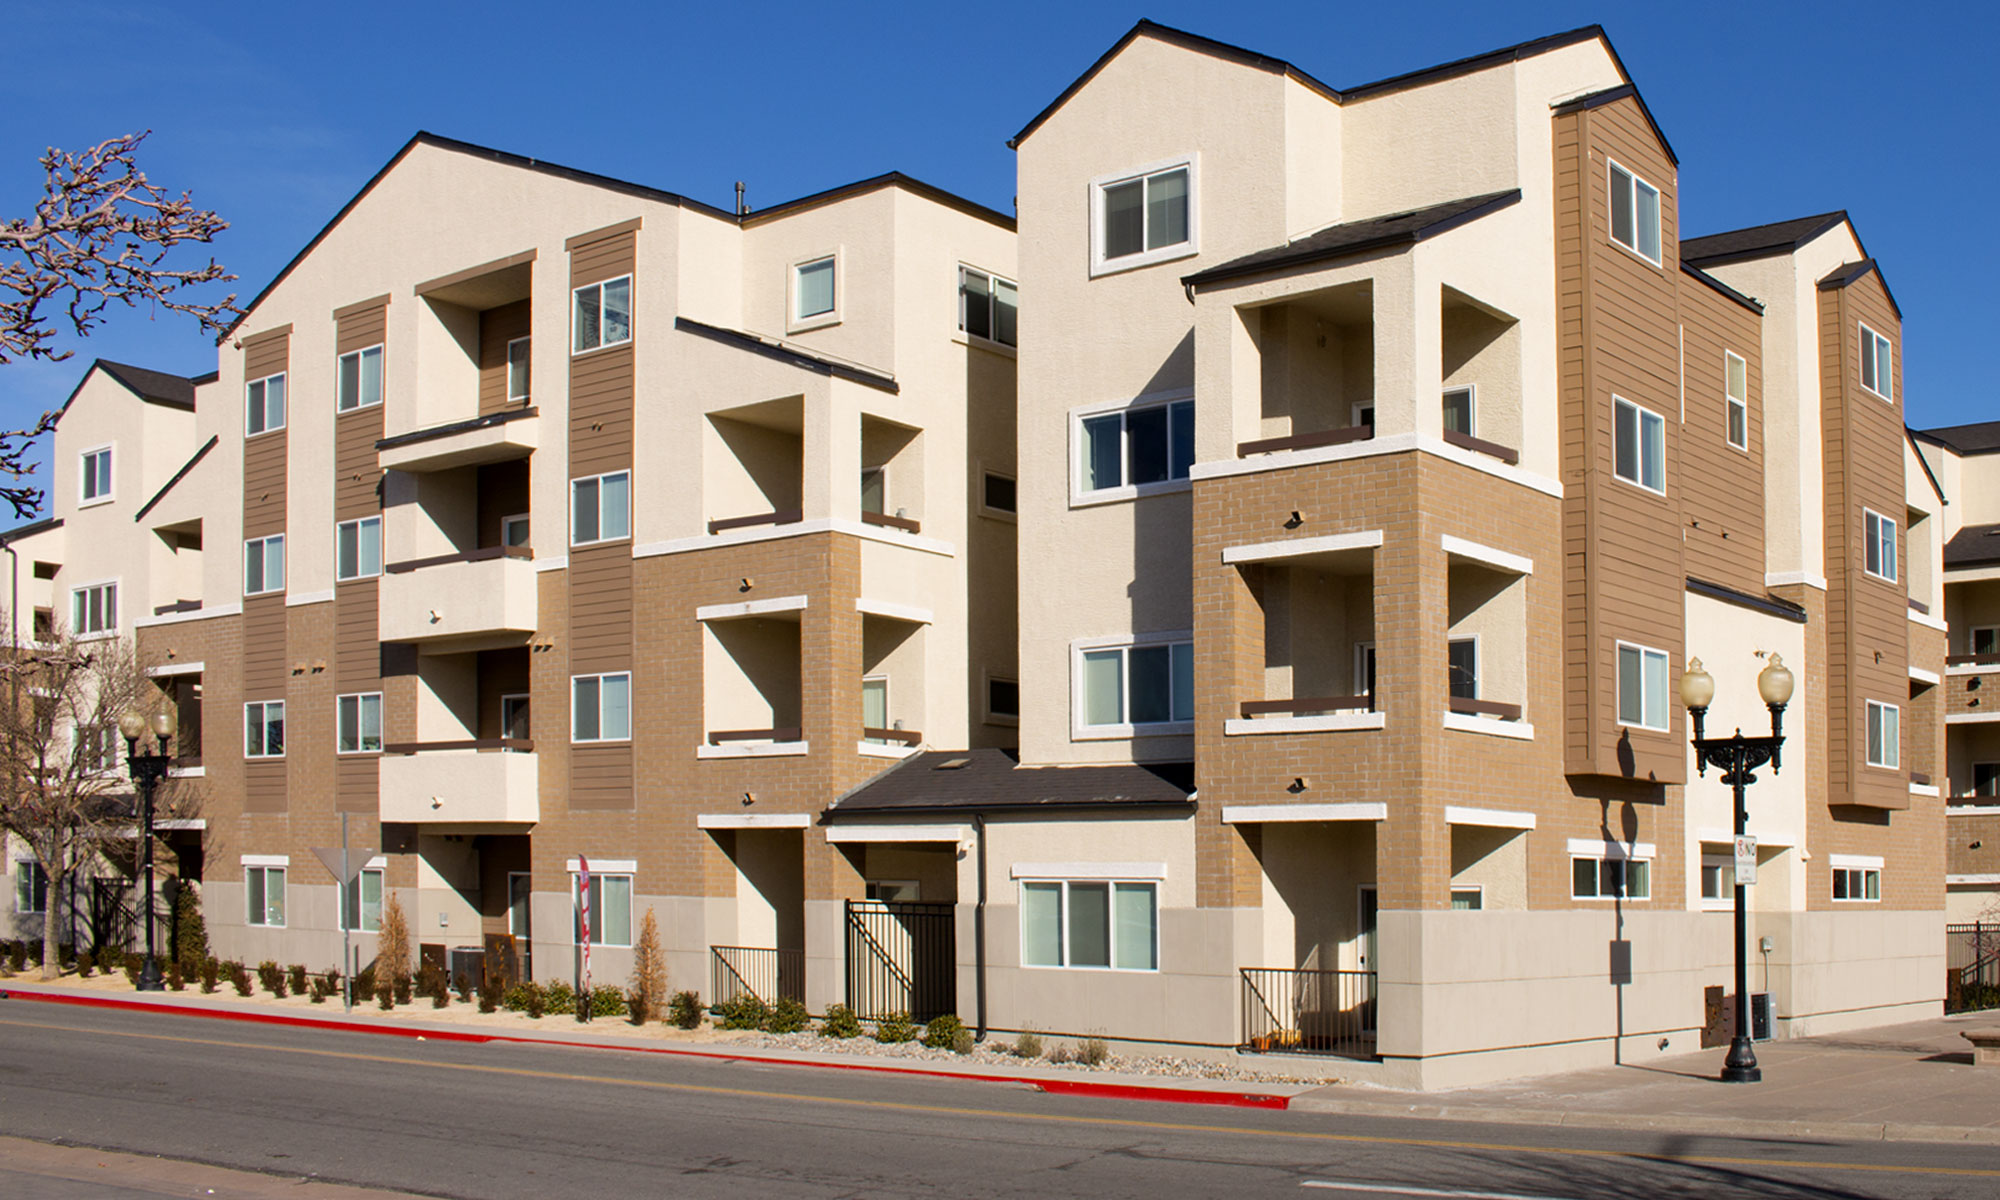 paint nv multi family residence painting services apartments